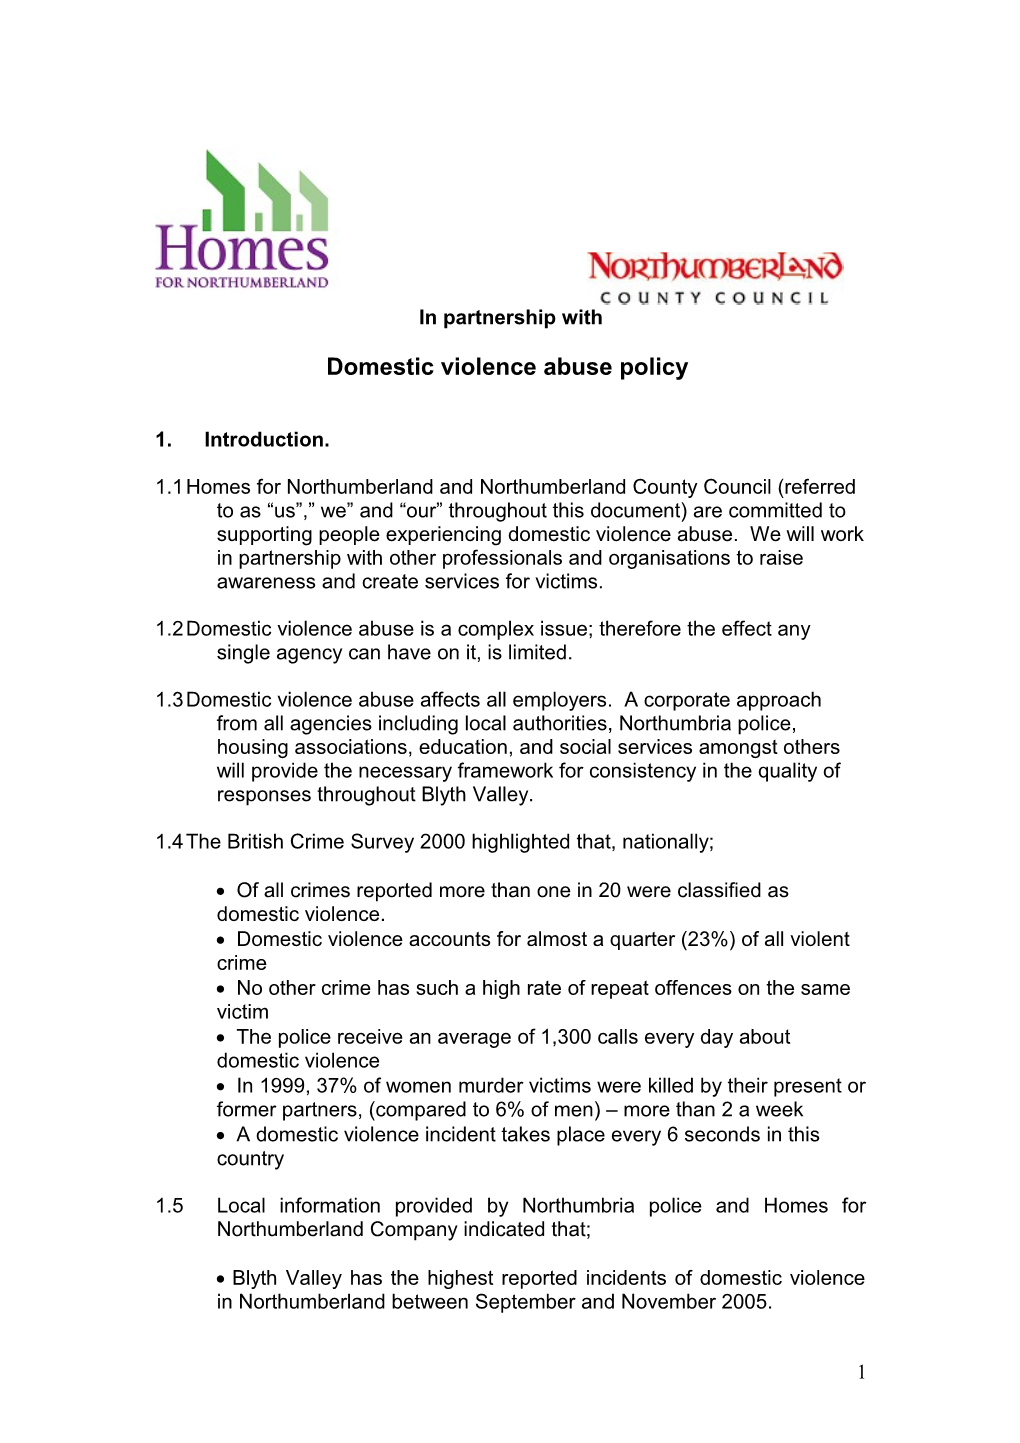 Domestic Violence Draft Policy (April 2006)